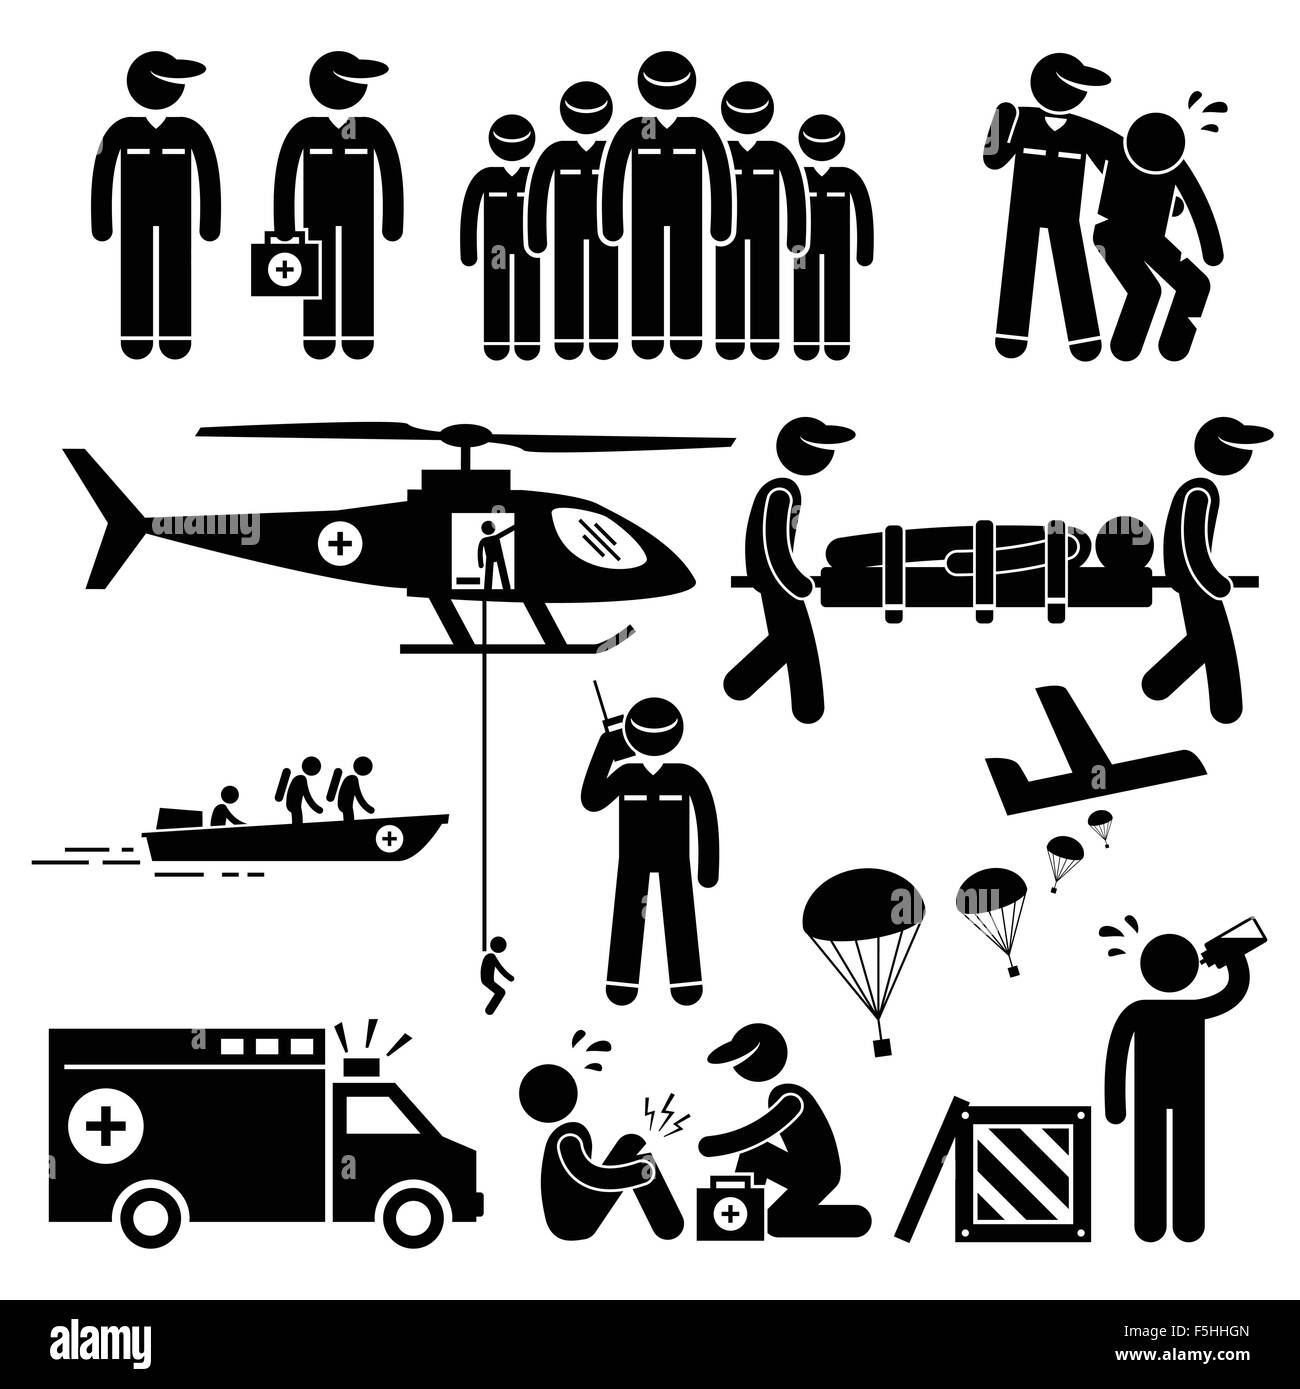 Emergency Rescue Team Stick Figure Pictogram Icons Stock Vector